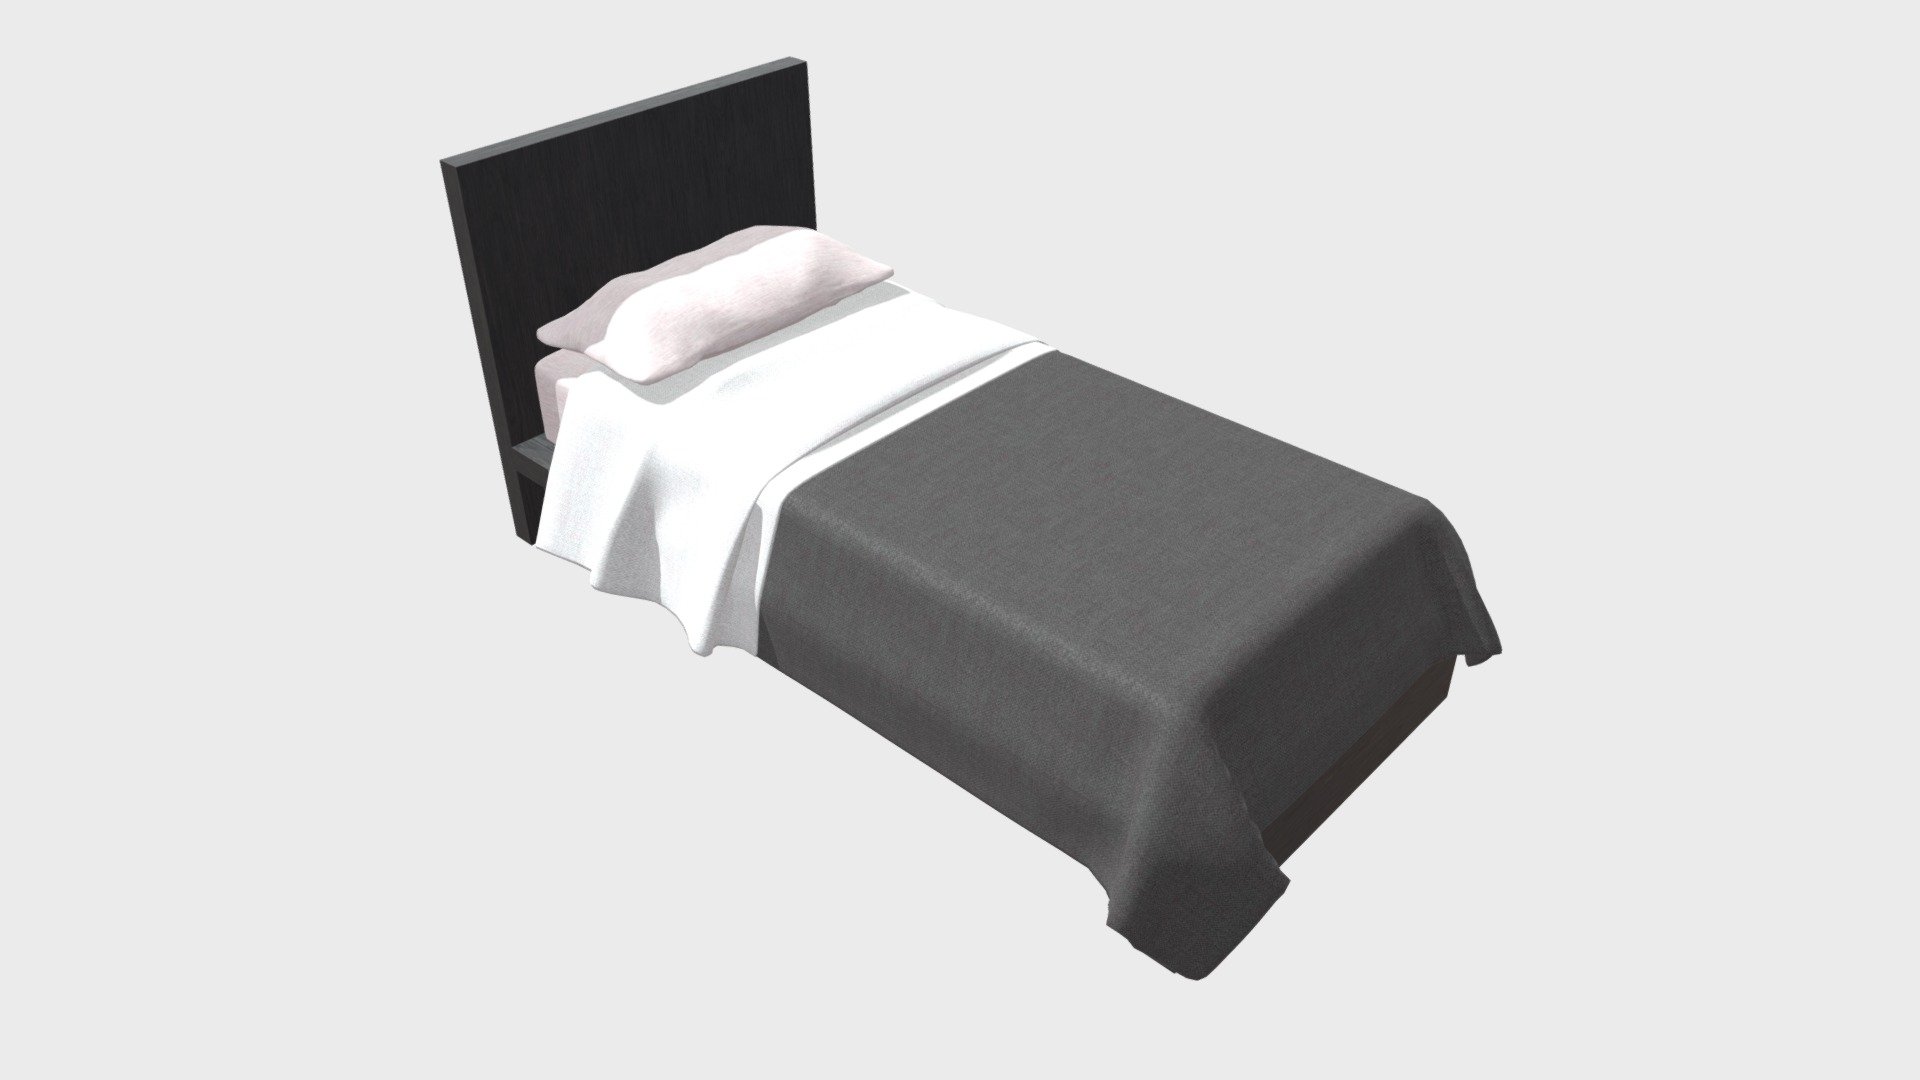 === The following description refers to the additional ZIP package provided with this model ===

Single bed 3D Model. Production-ready 3D Model, with PBR materials, textures, non overlapping UV Layout map provided in the package.

Quads only geometries (no tris/ngons).

Formats included: FBX, OBJ; scenes: BLEND (with Cycles / Eevee PBR Materials and Textures); other: png with Alpha.

1 Object (mesh), 1 PBR Material, UV unwrapped (non overlapping UV Layout map provided in the package); UV-mapped Textures.

UV Layout maps and Image Textures resolutions: 2048x2048; PBR Textures made with Substance Painter.

Polygonal, QUADS ONLY (no tris/ngons); 21954 vertices, 21938 quad faces (43876 tris).

Real world dimensions; scene scale units: cm in Blender 3.1 (that is: Metric with 0.01 scale).

Uniform scale object (scale applied in Blender 3.1) 3d model